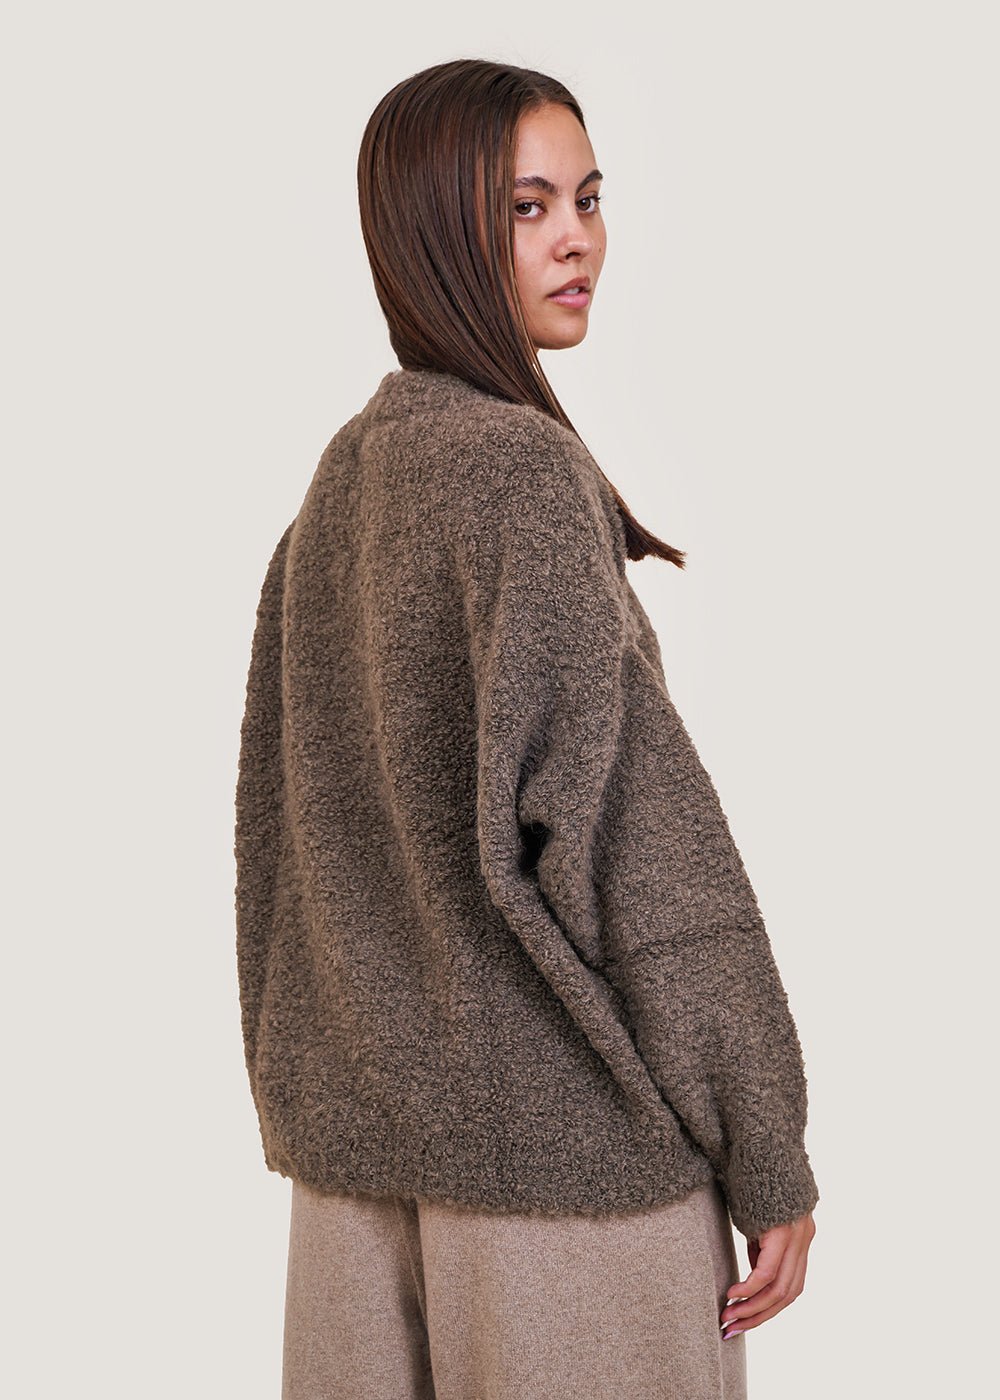 Cordera Vetiver Bouclé Sweater - New Classics Studios Sustainable Ethical Fashion Canada